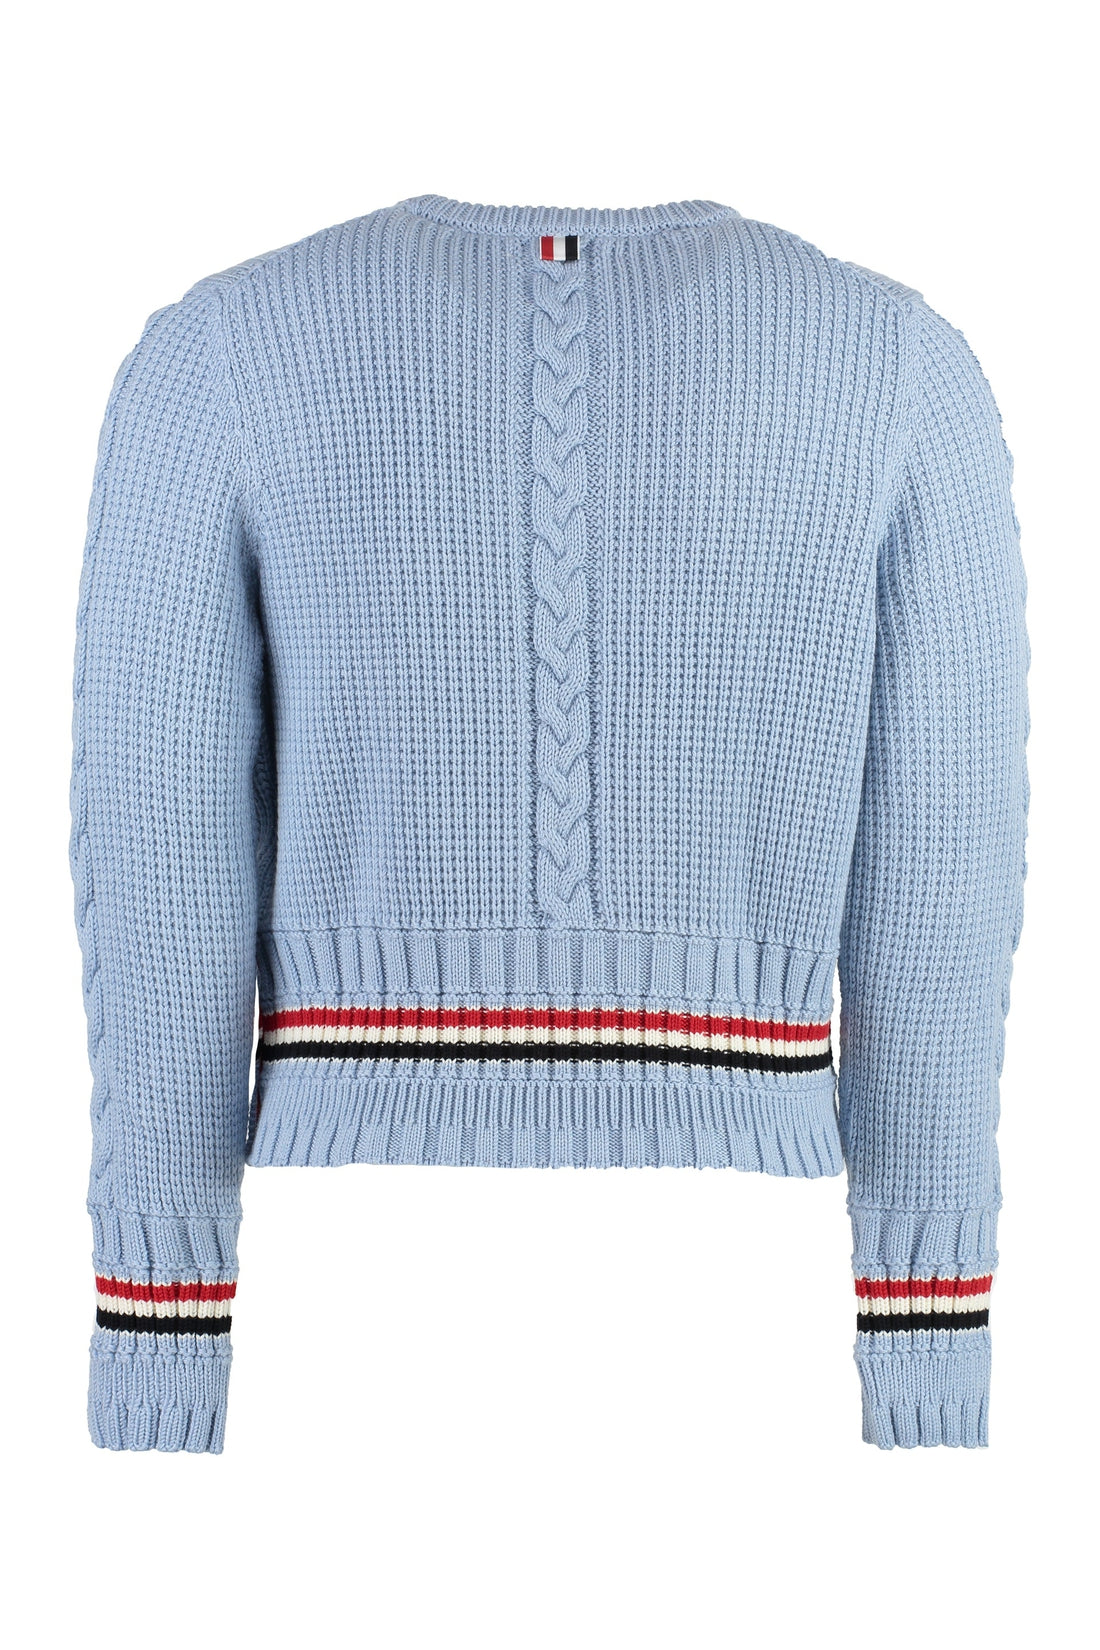 Thom Browne-OUTLET-SALE-Long sleeve crew-neck sweater-ARCHIVIST